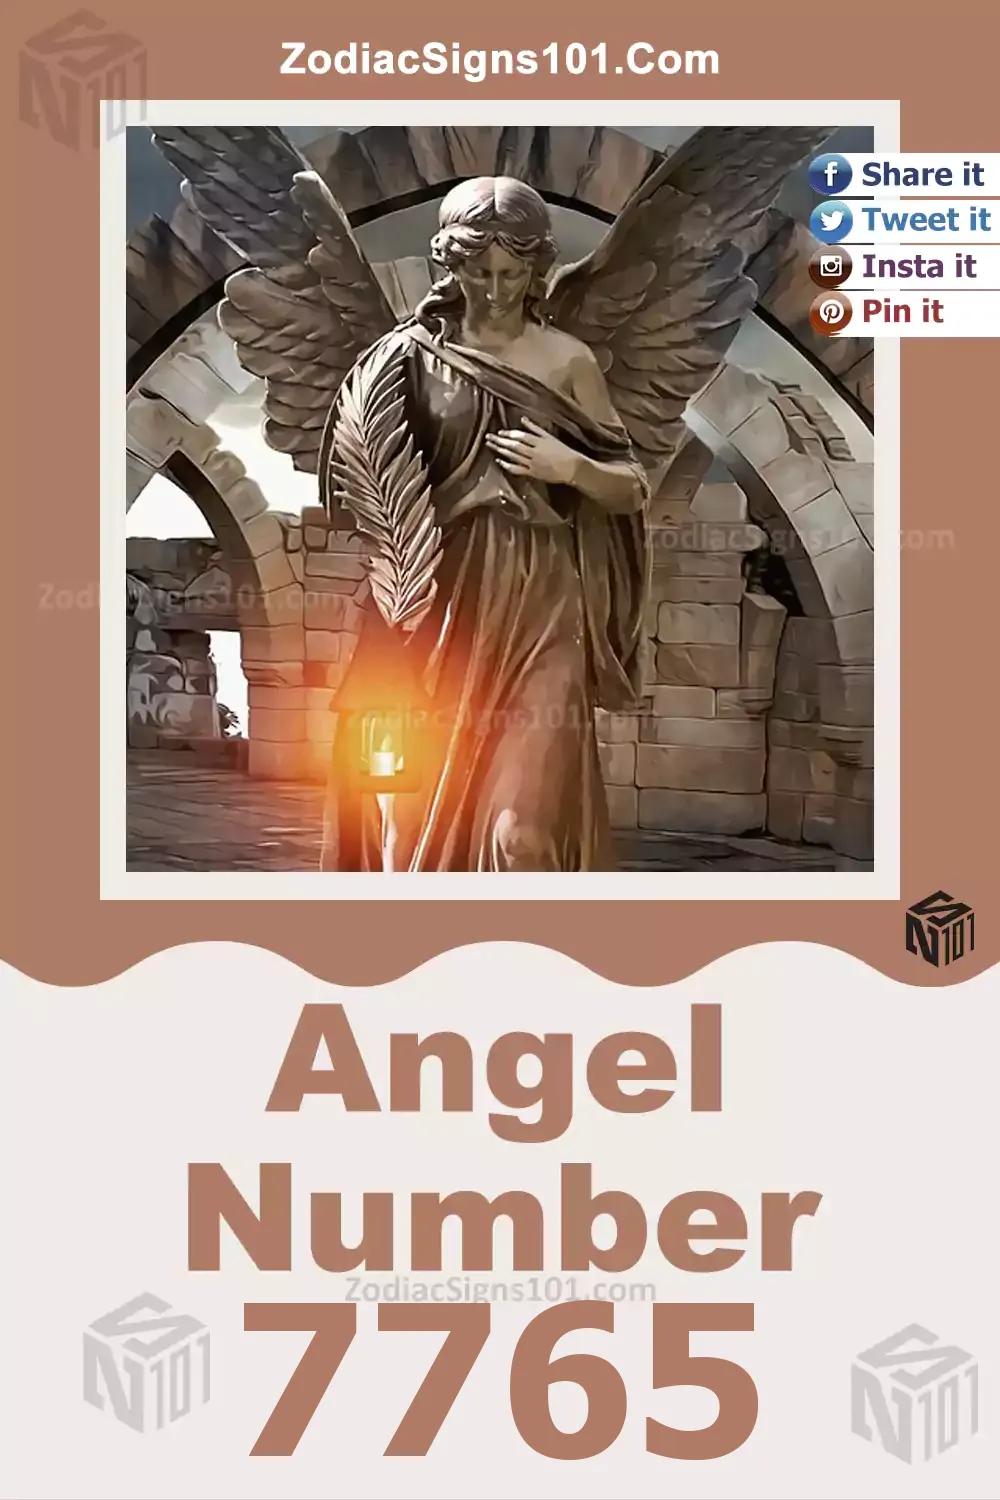 7765 Angel Number Meaning